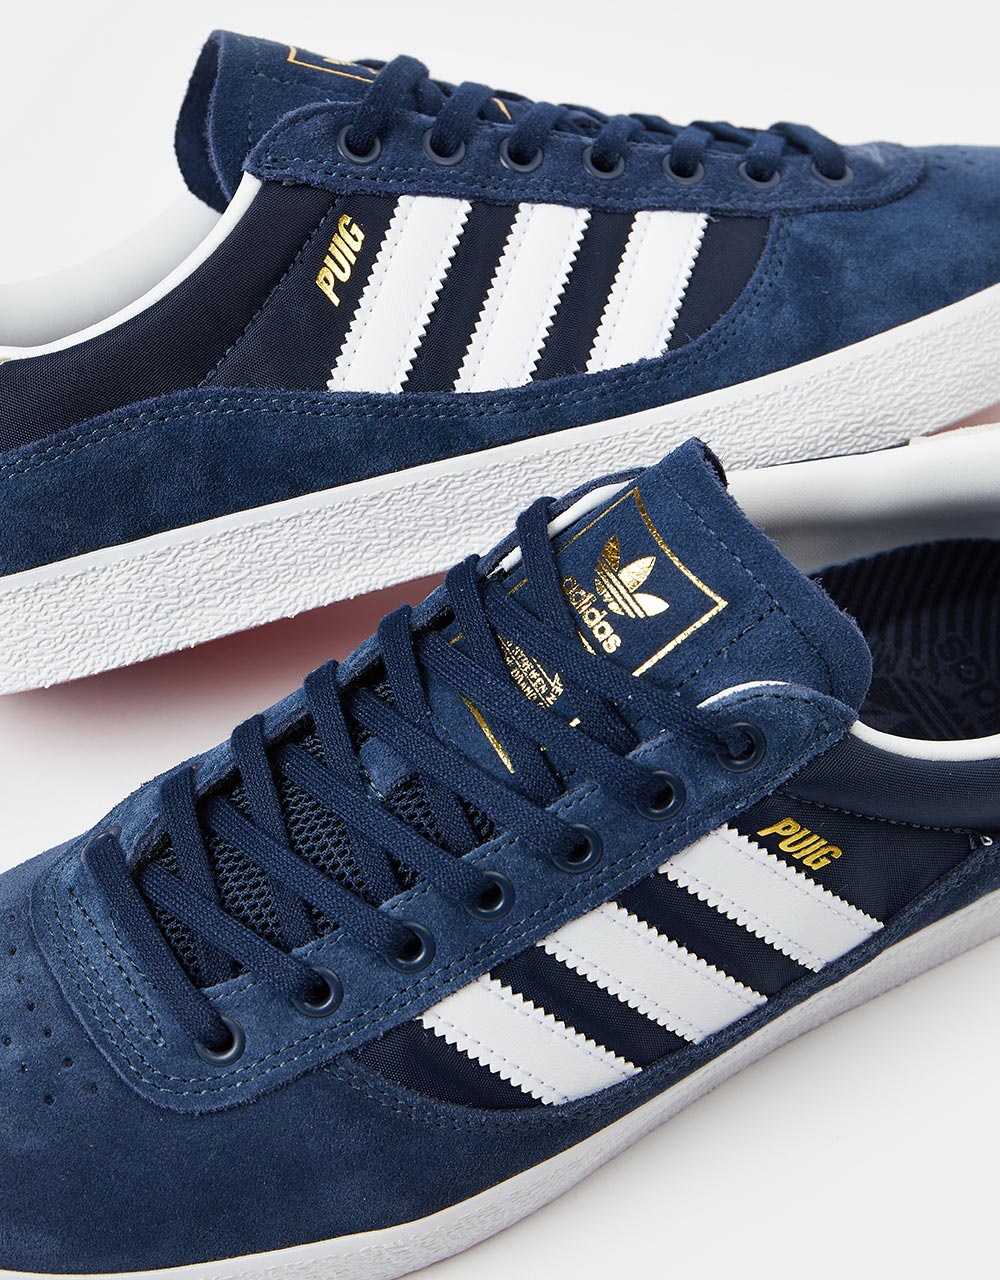 adidas Puig Indoor Skate Shoes - Collegiate Navy/White/Shadow Navy